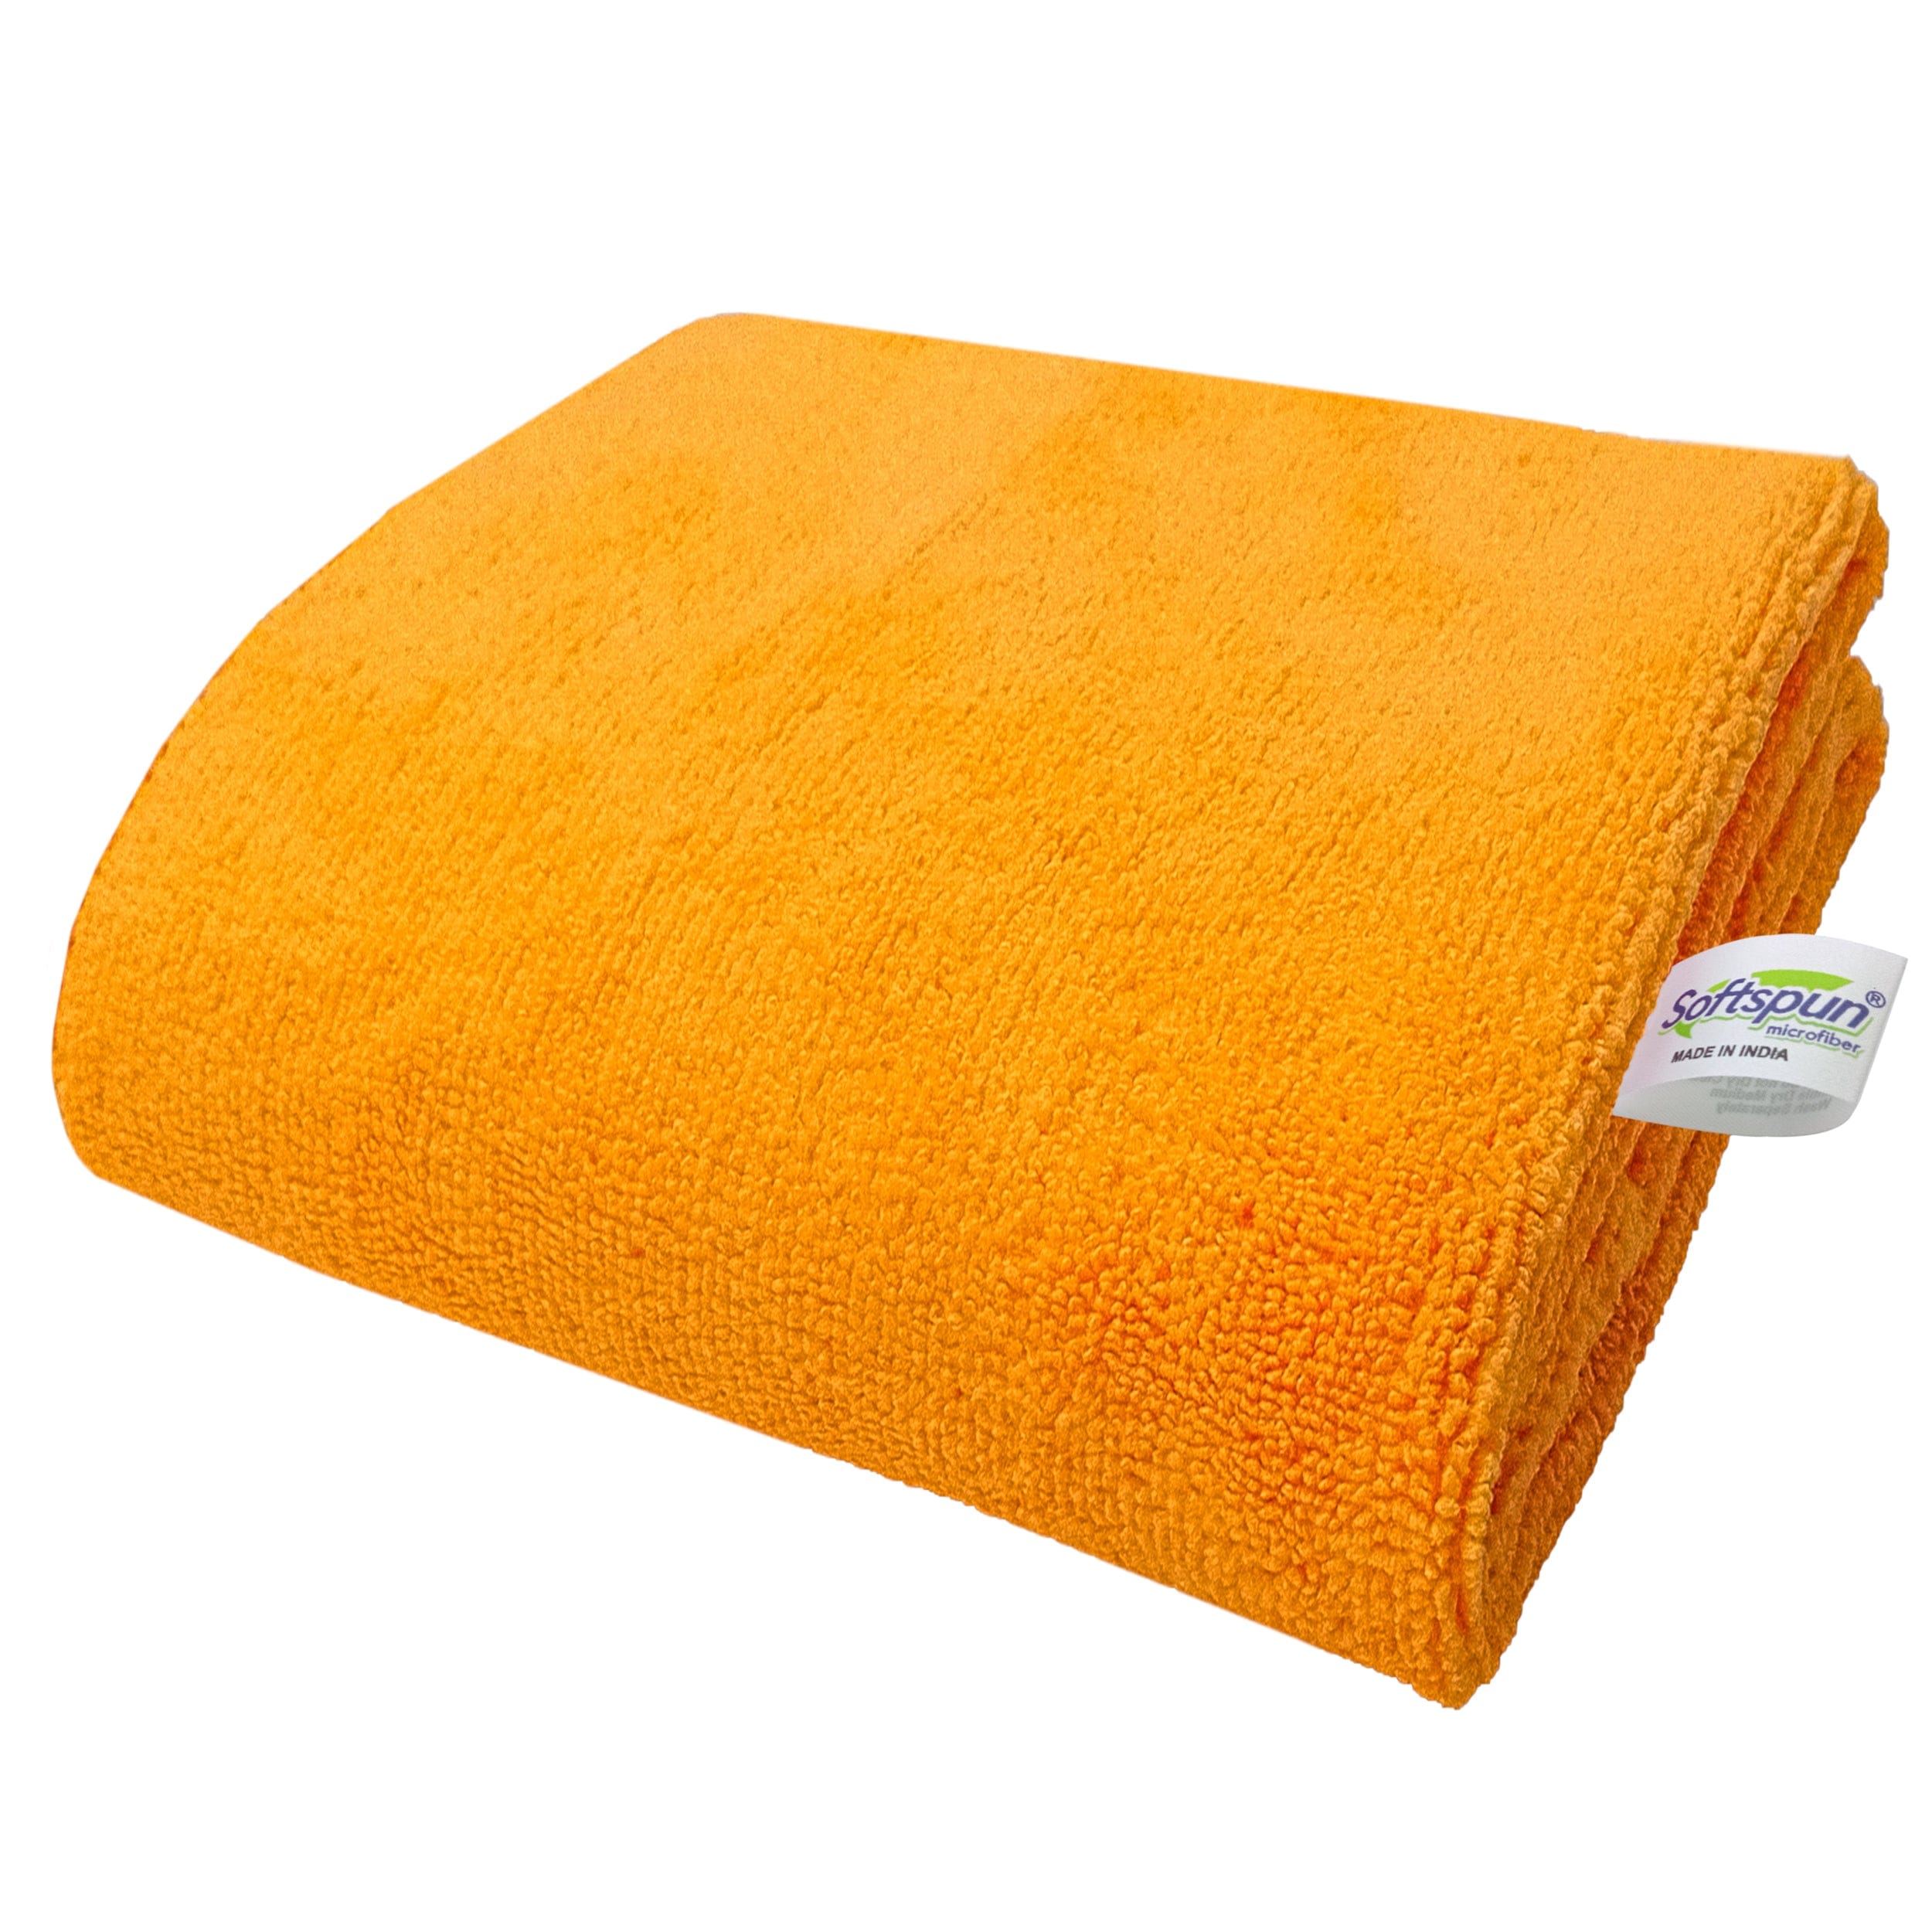 SOFTSPUN Microfiber Hair and Face Care Towel Set of 1 Piece, 340 GSM. Super Soft & Comfortable, Quick Drying, Ultra Absorbent in Large Size.